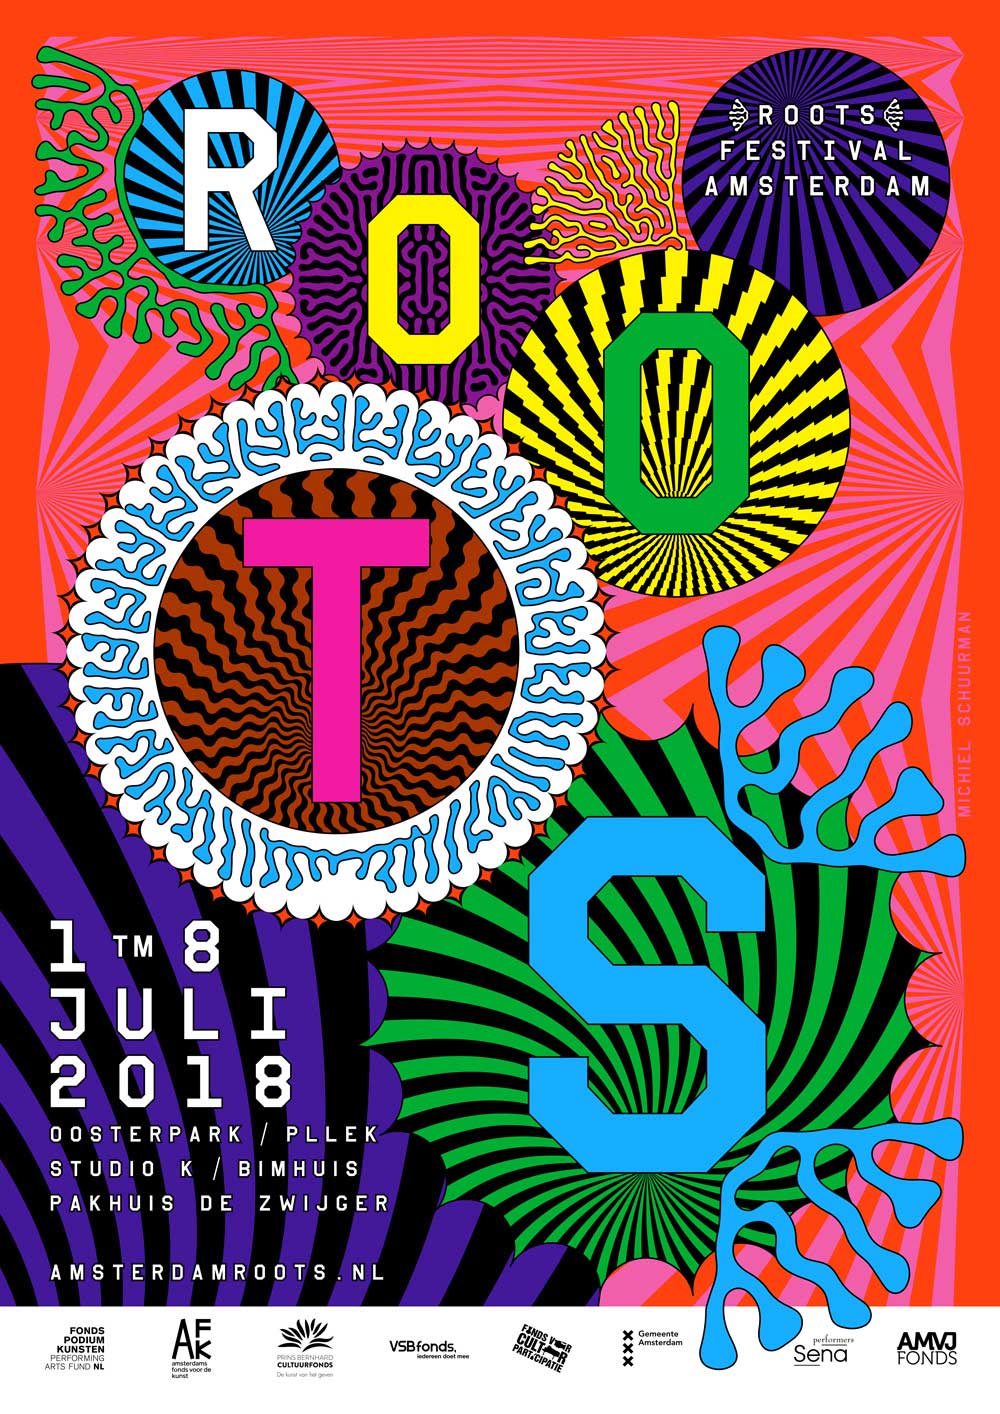 AMSTERDAM ROOTS FESTIVAL